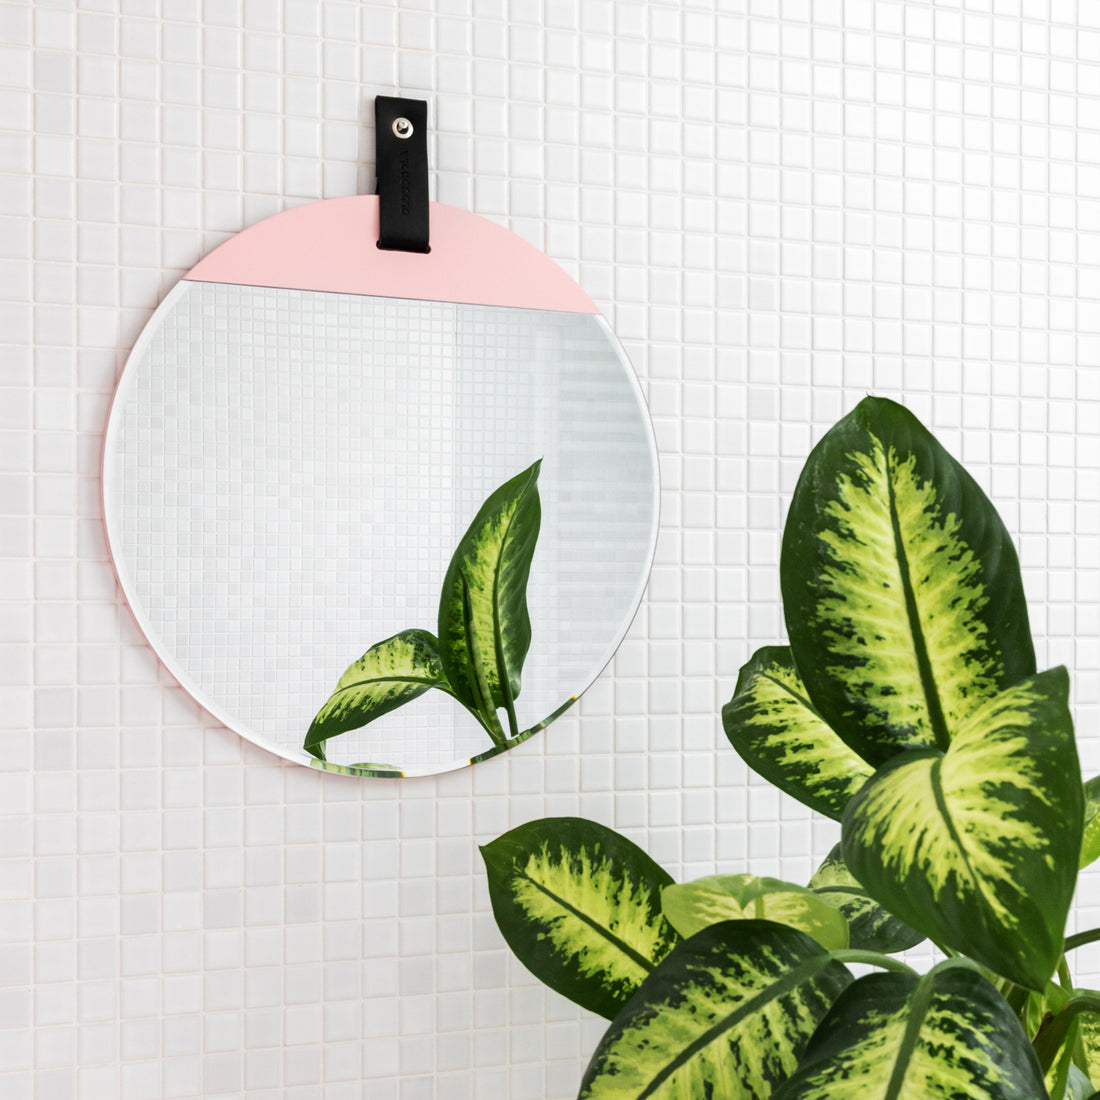 The 12 Best Wall Mirrors of 2022 -The Spruce